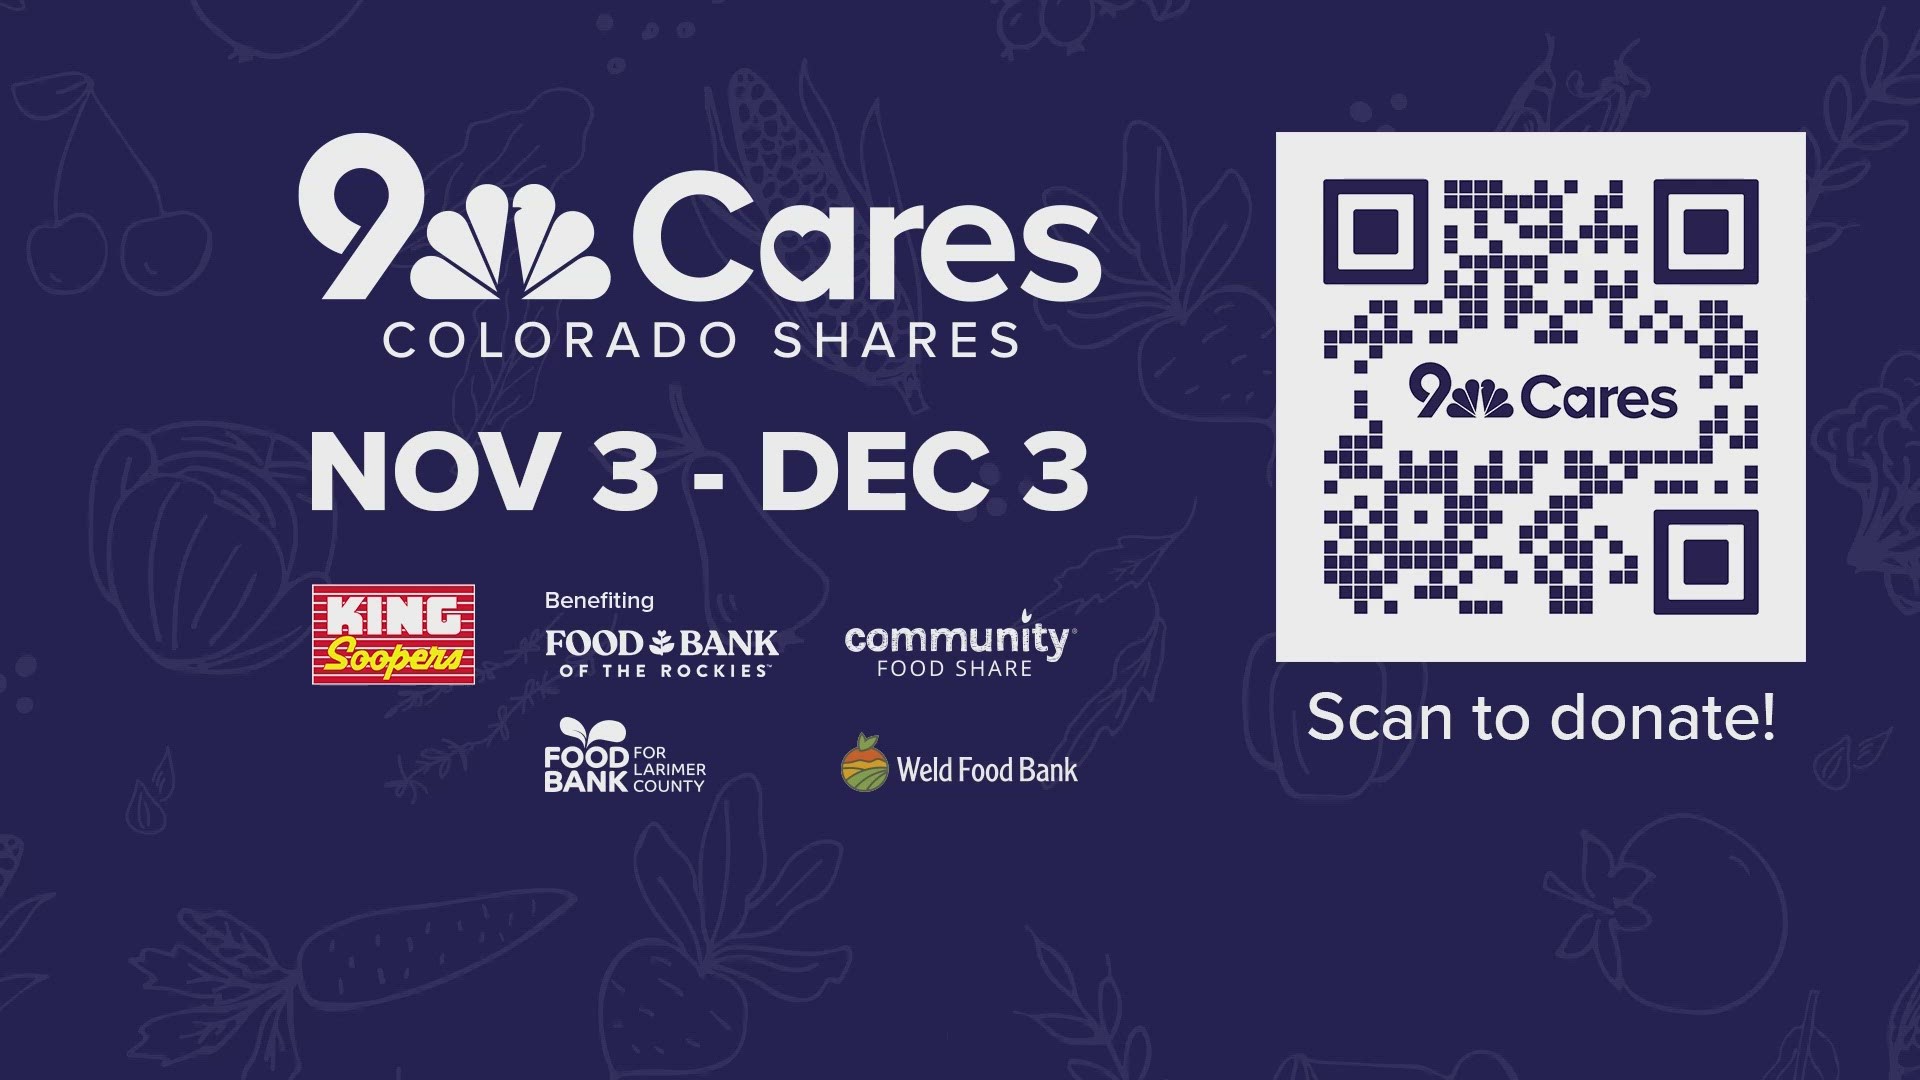 The 9Cares Colorado Shares Drive is going on now. We partner with food banks around the state to raise money to feed those in need in our community.